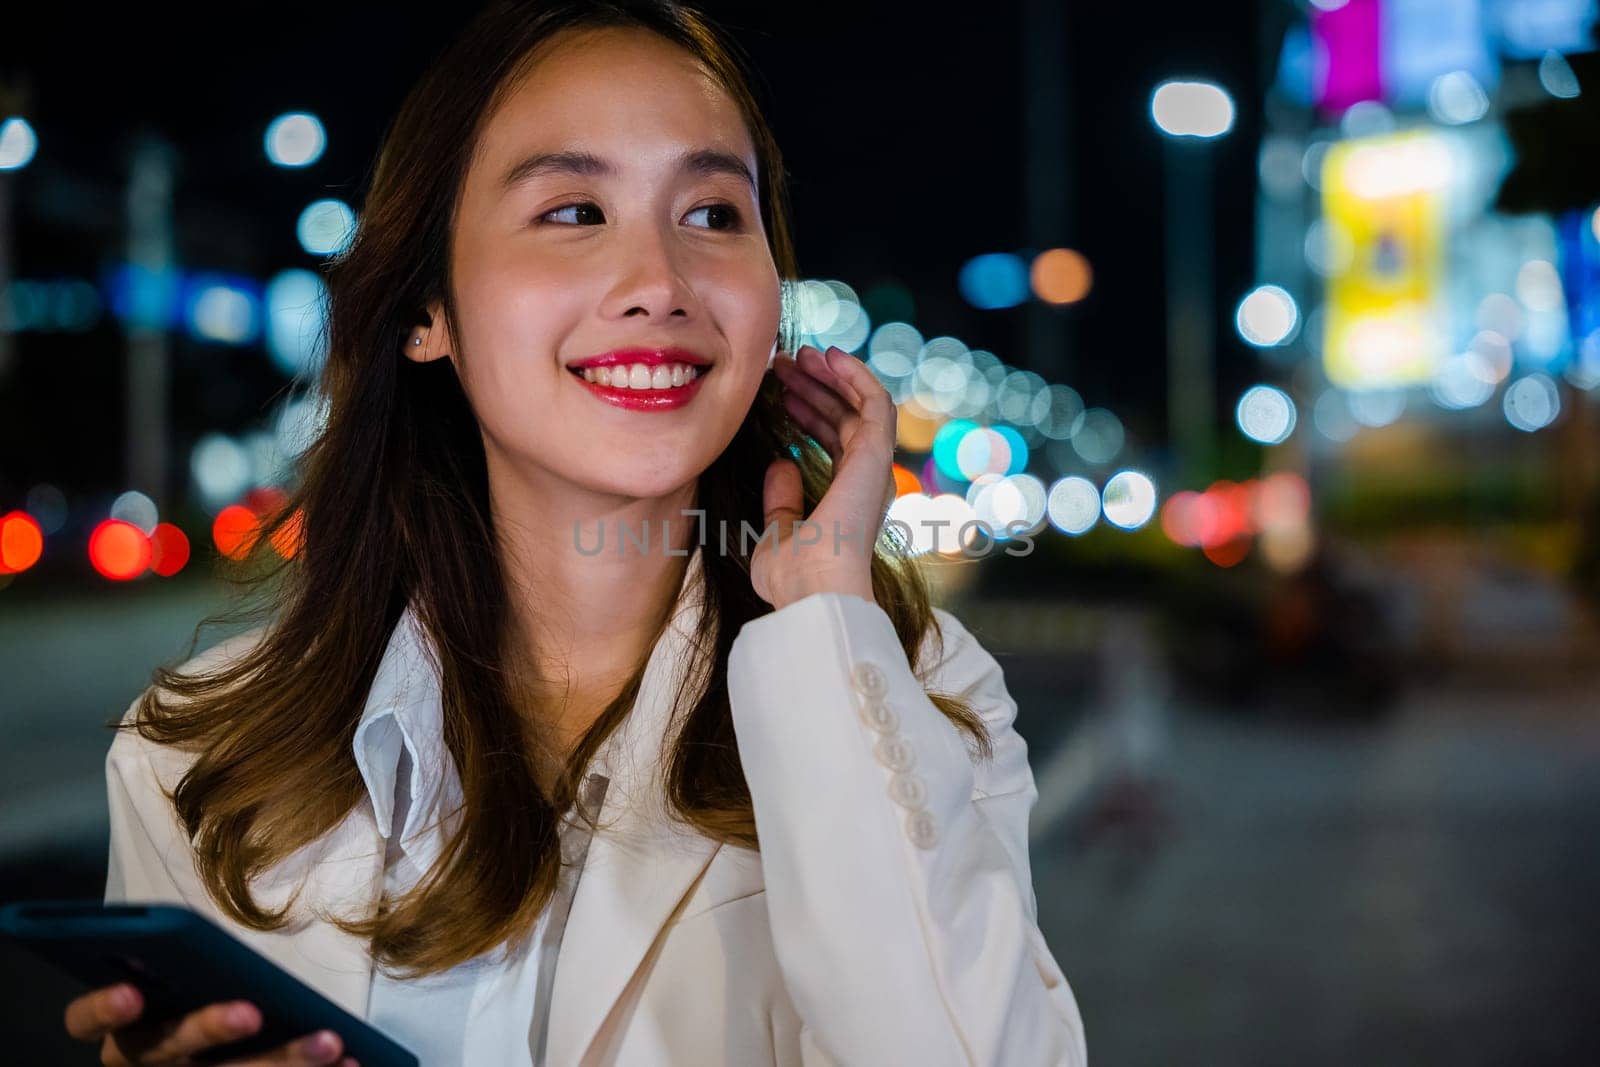 Smiling woman enjoying music through earphones attached to her mobile phone while strolling the night city streets. Wireless technology and digital devices make life convenient. Portrait of happy girl